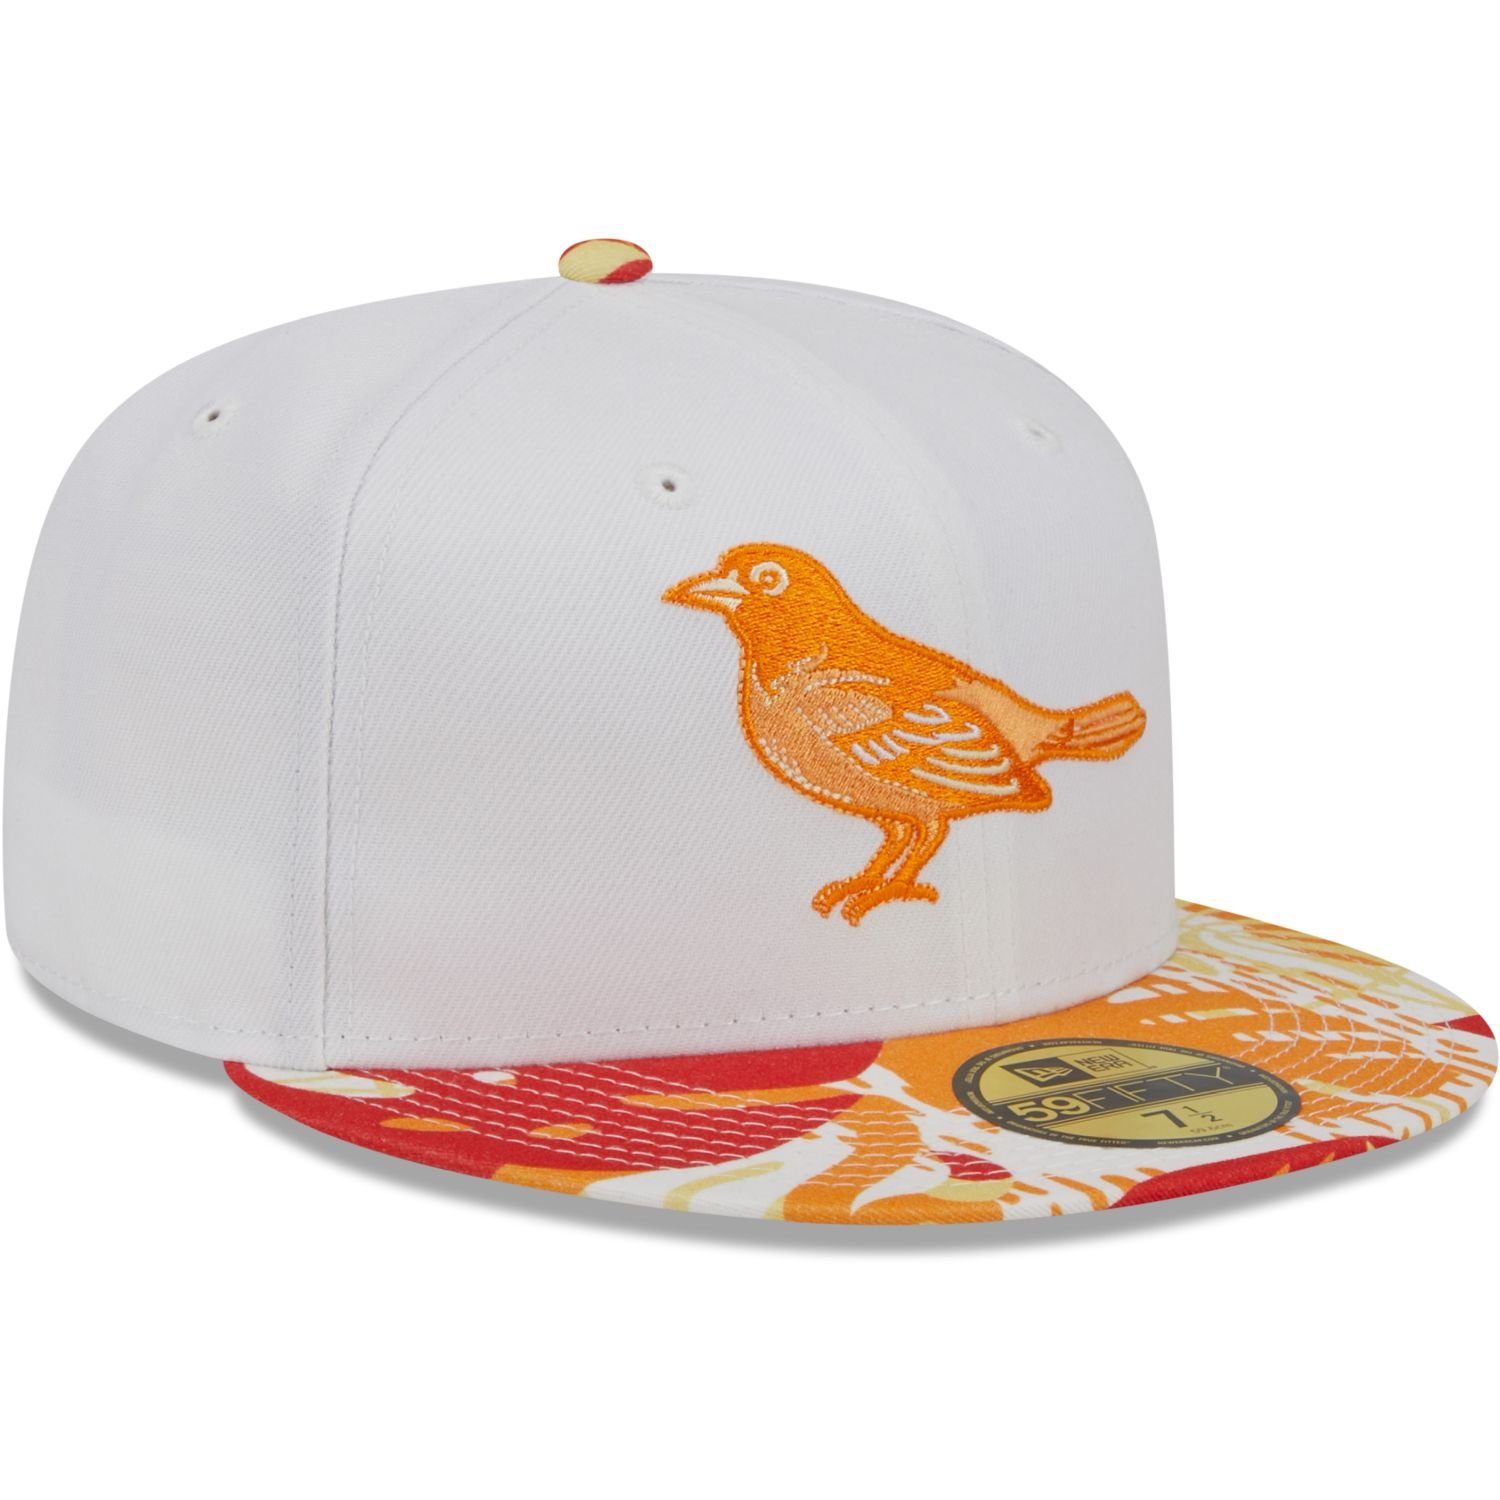 Cap New 59Fifty Orioles Era floral Baltimore Fitted